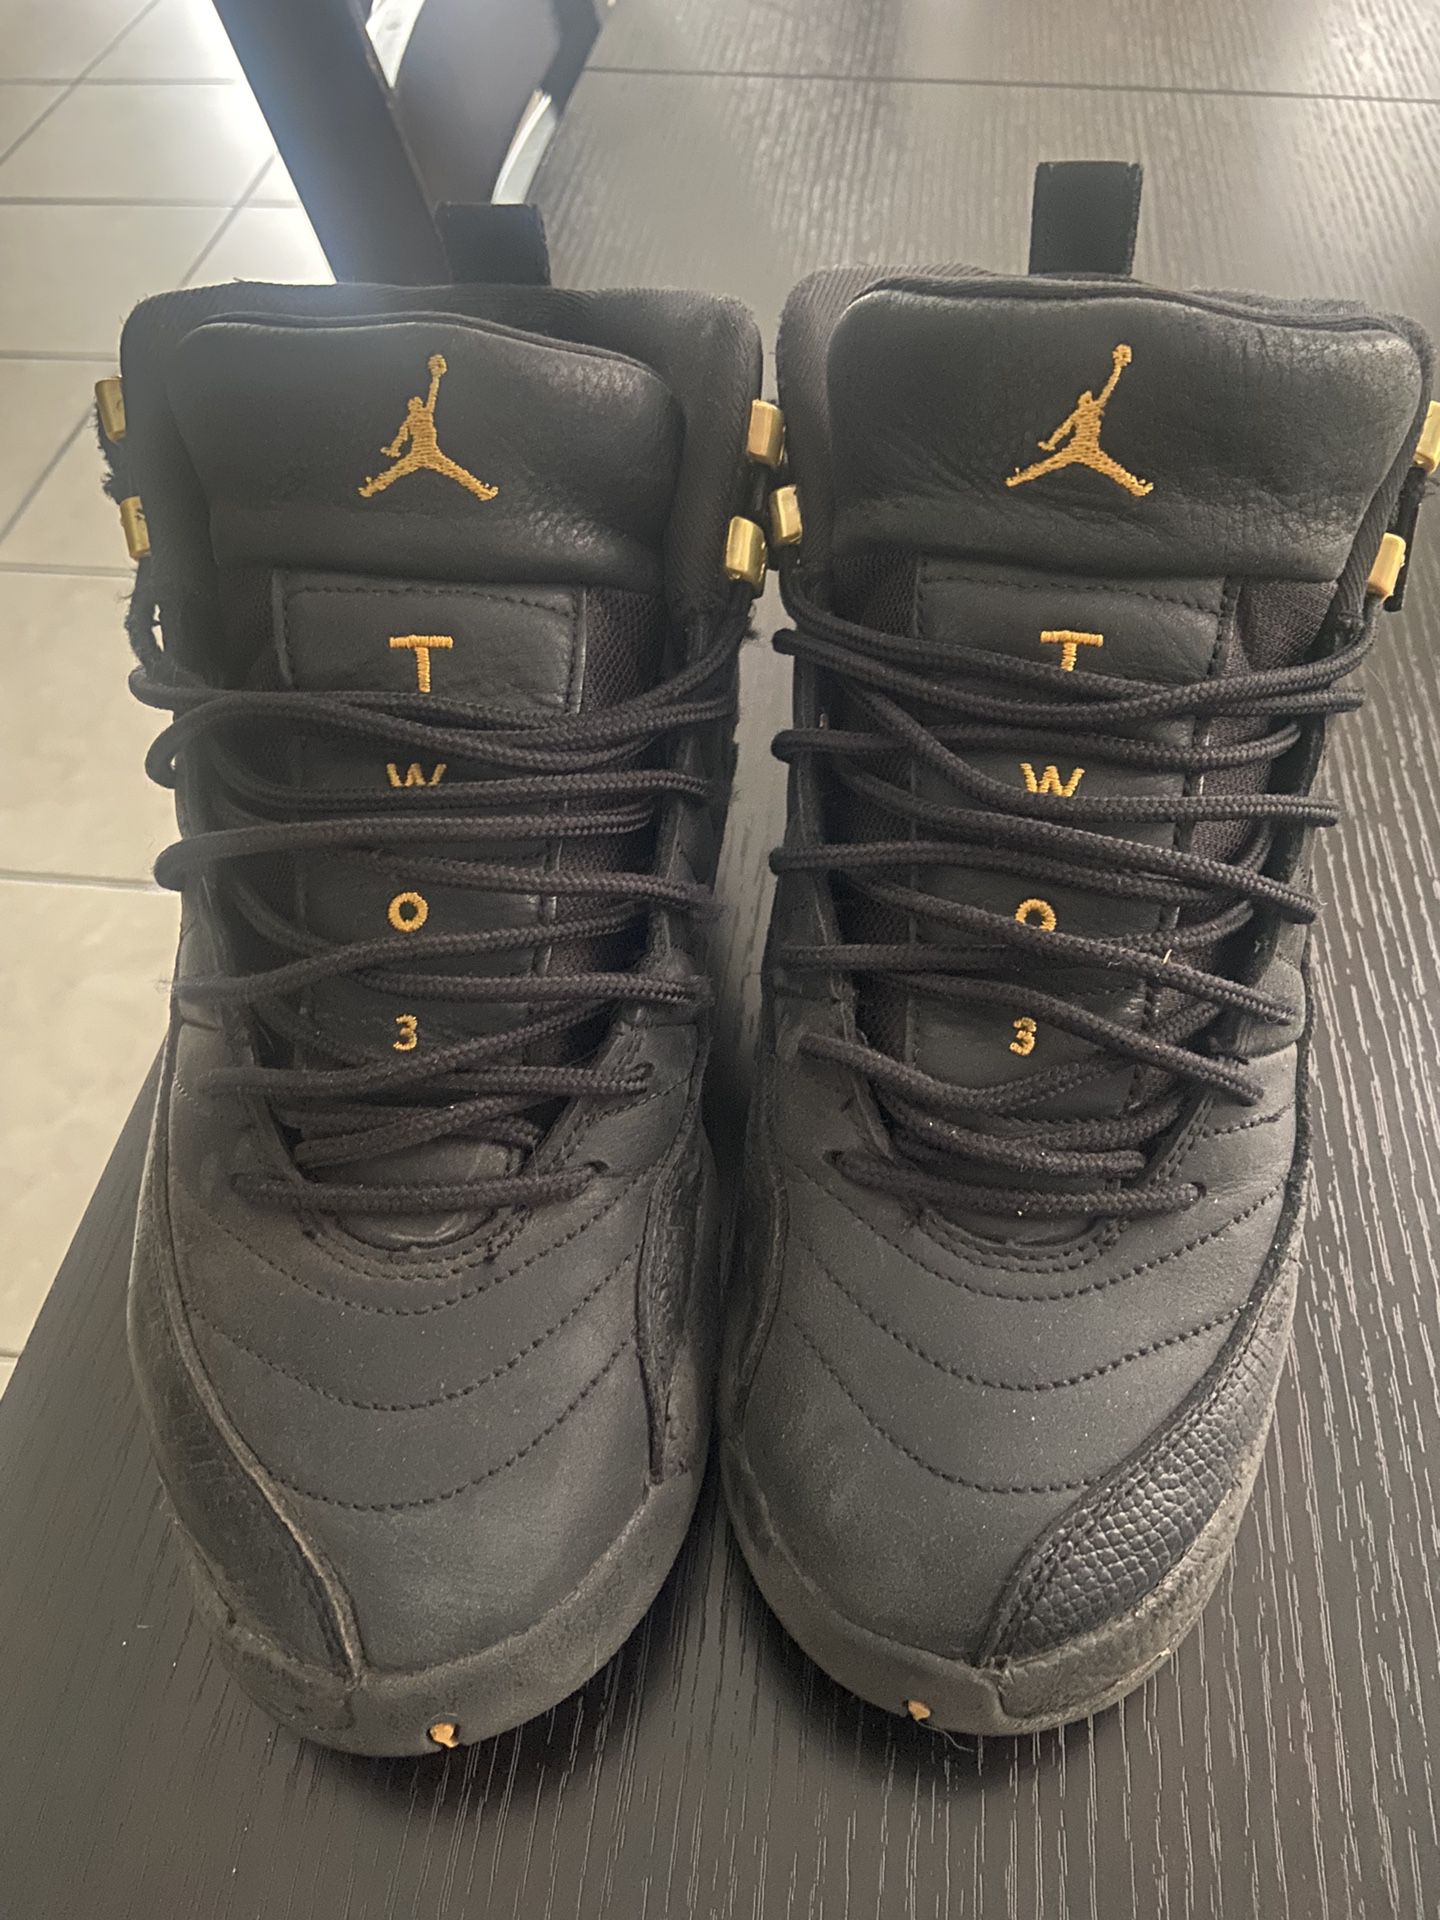 Jordan 12  Retro Black Taxi. 6.5 Youth (pick up only 